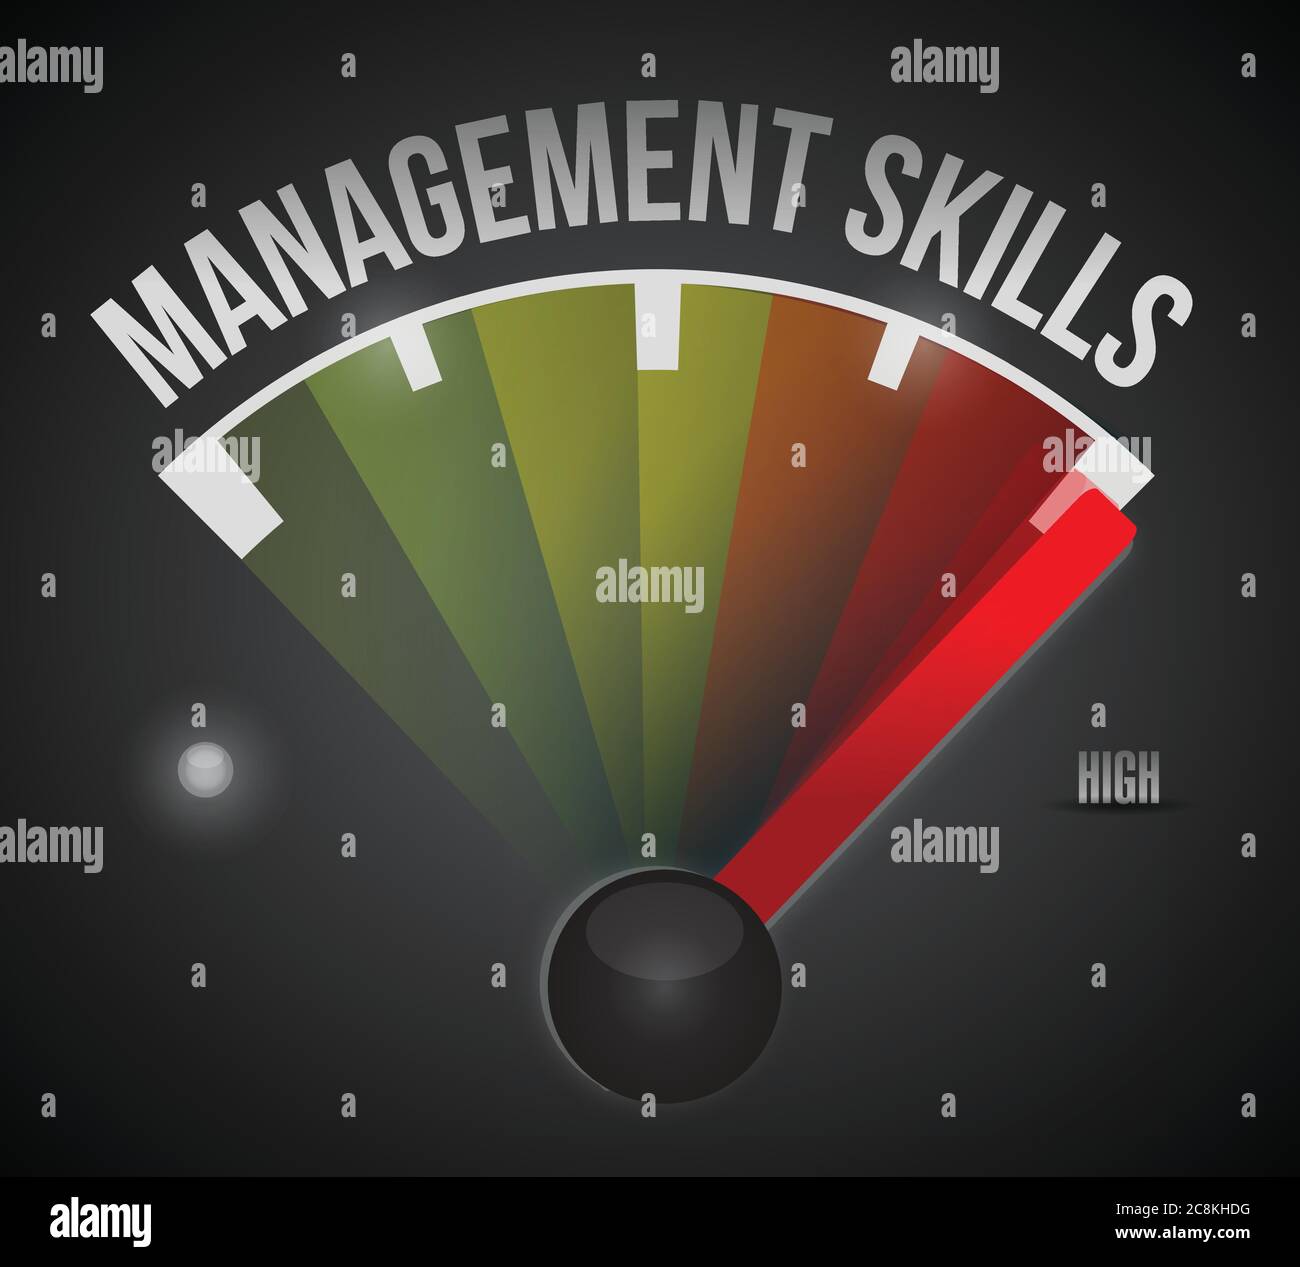 Management skills level measure meter from low to high, concept illustration design Stock Vector